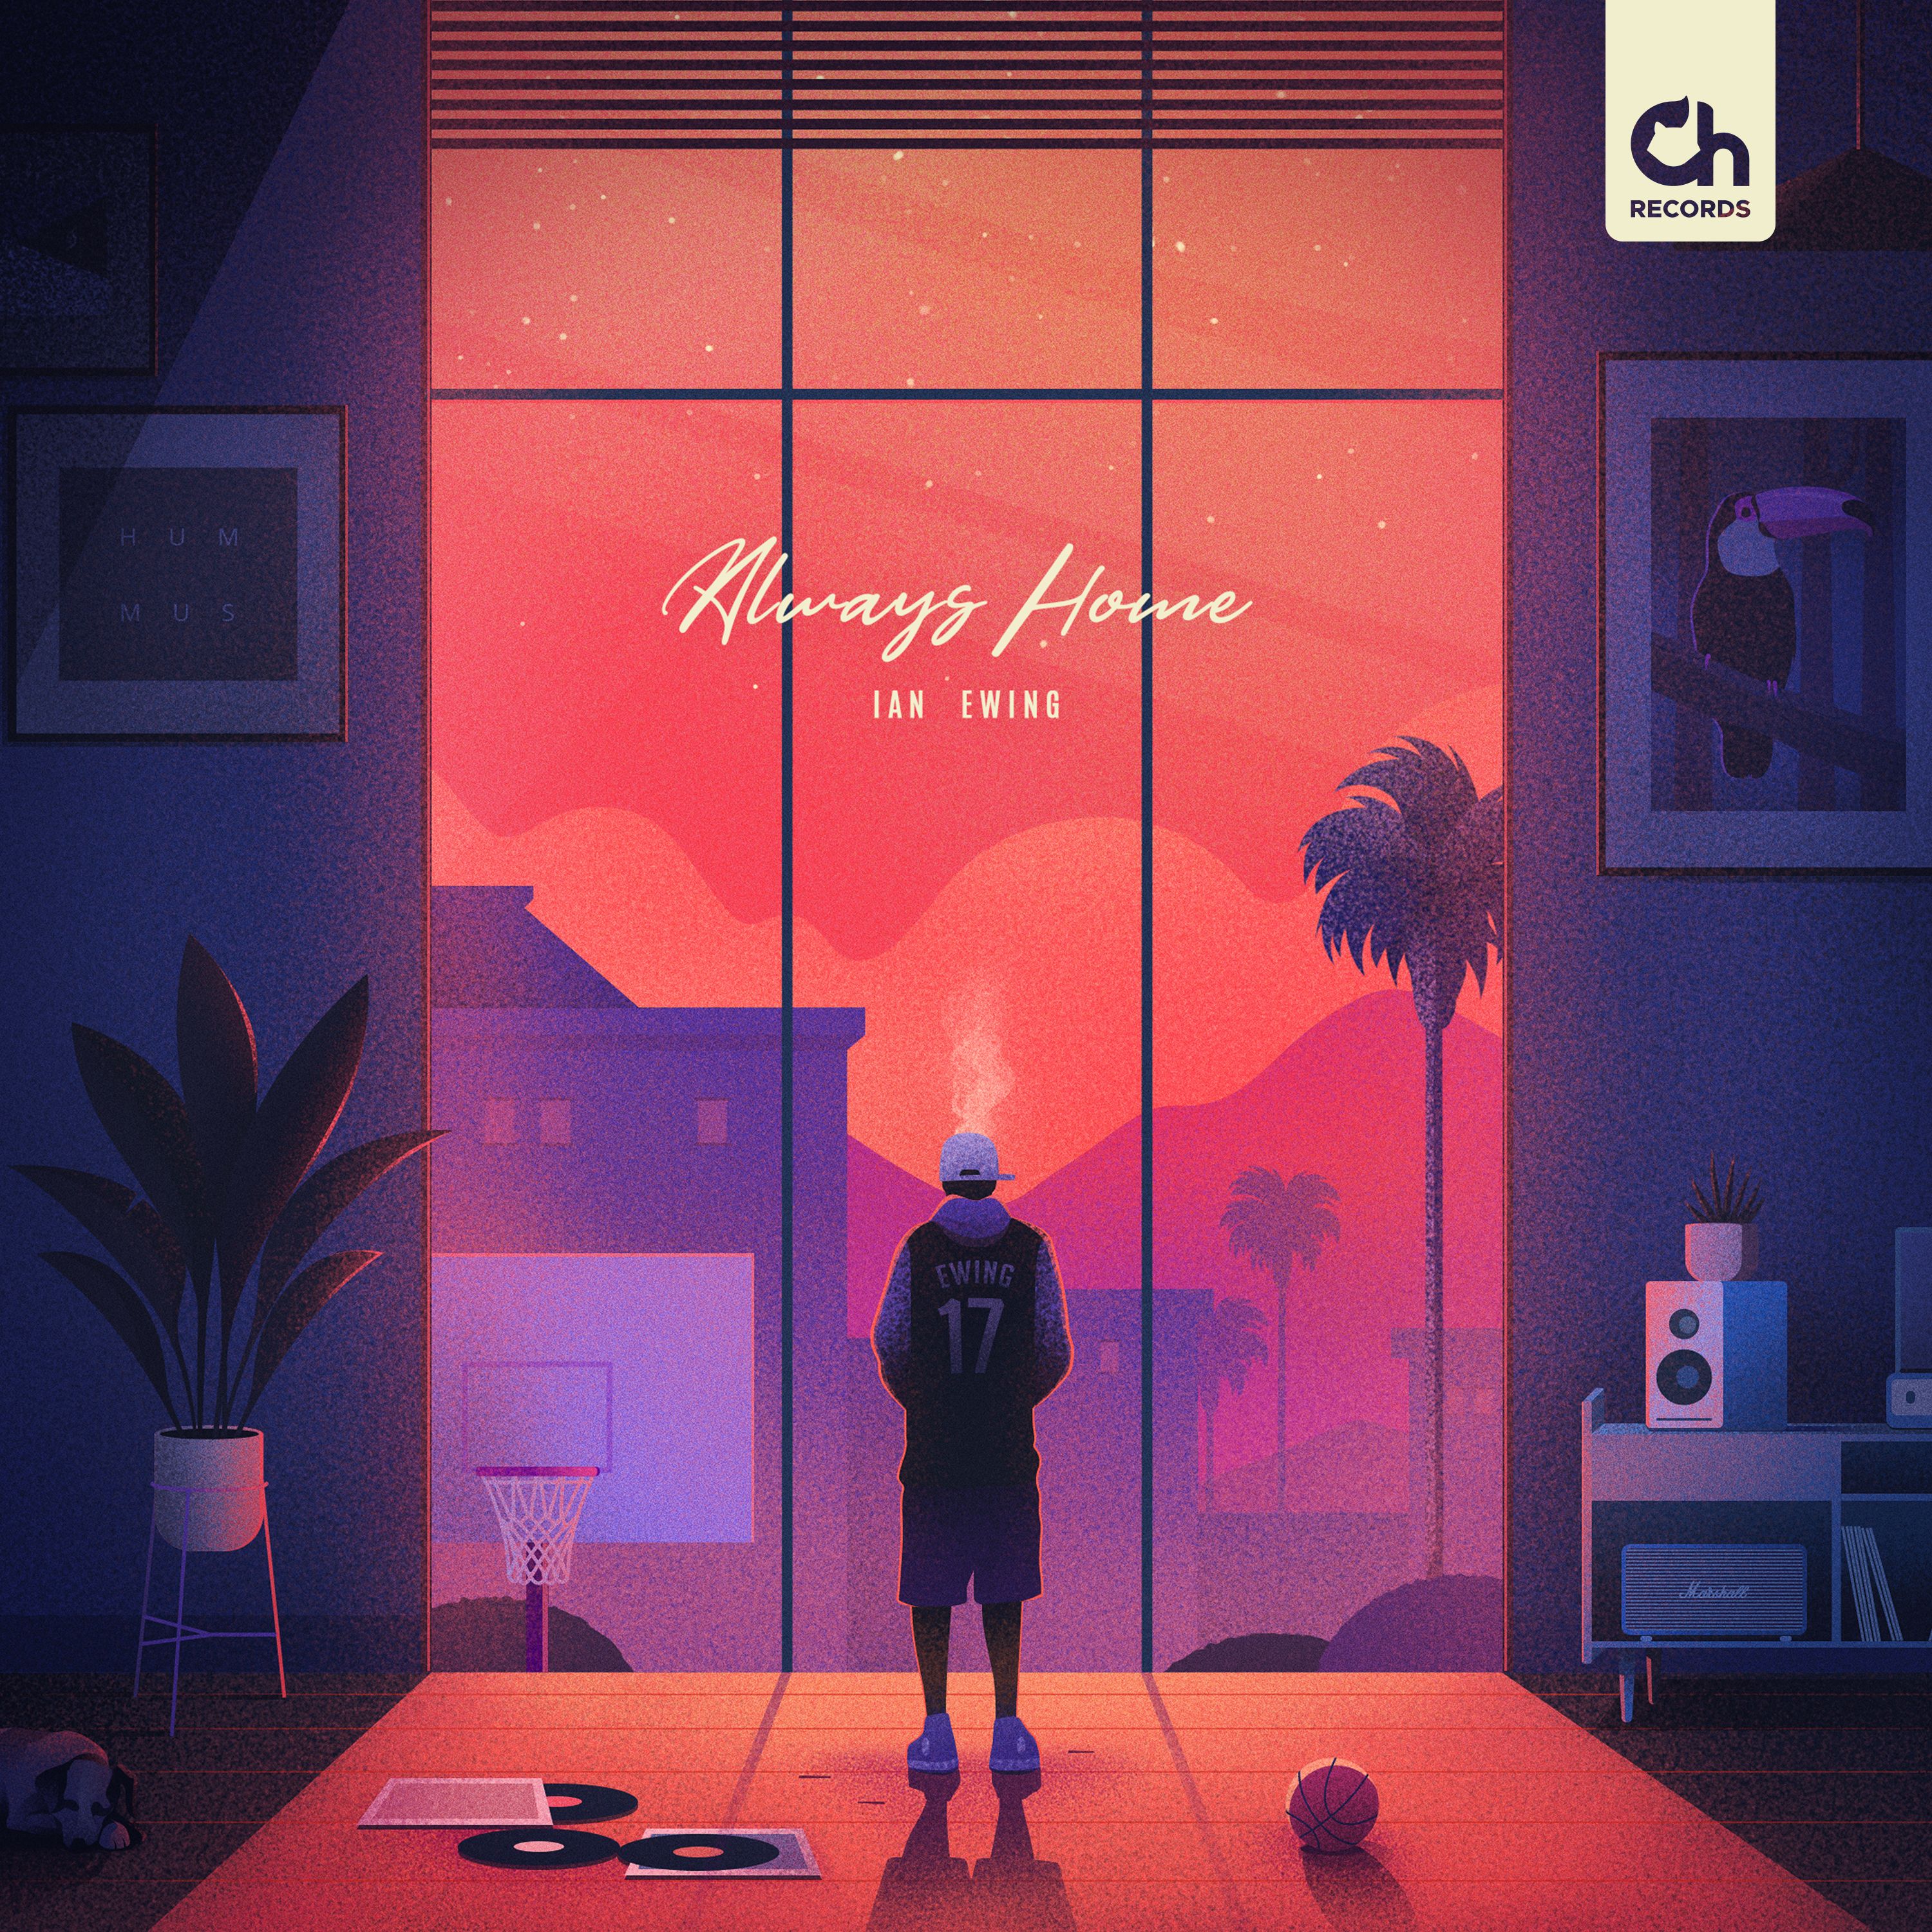 Shkarko Ian Ewing - 17 ["Always Home" EP out on 09.09]